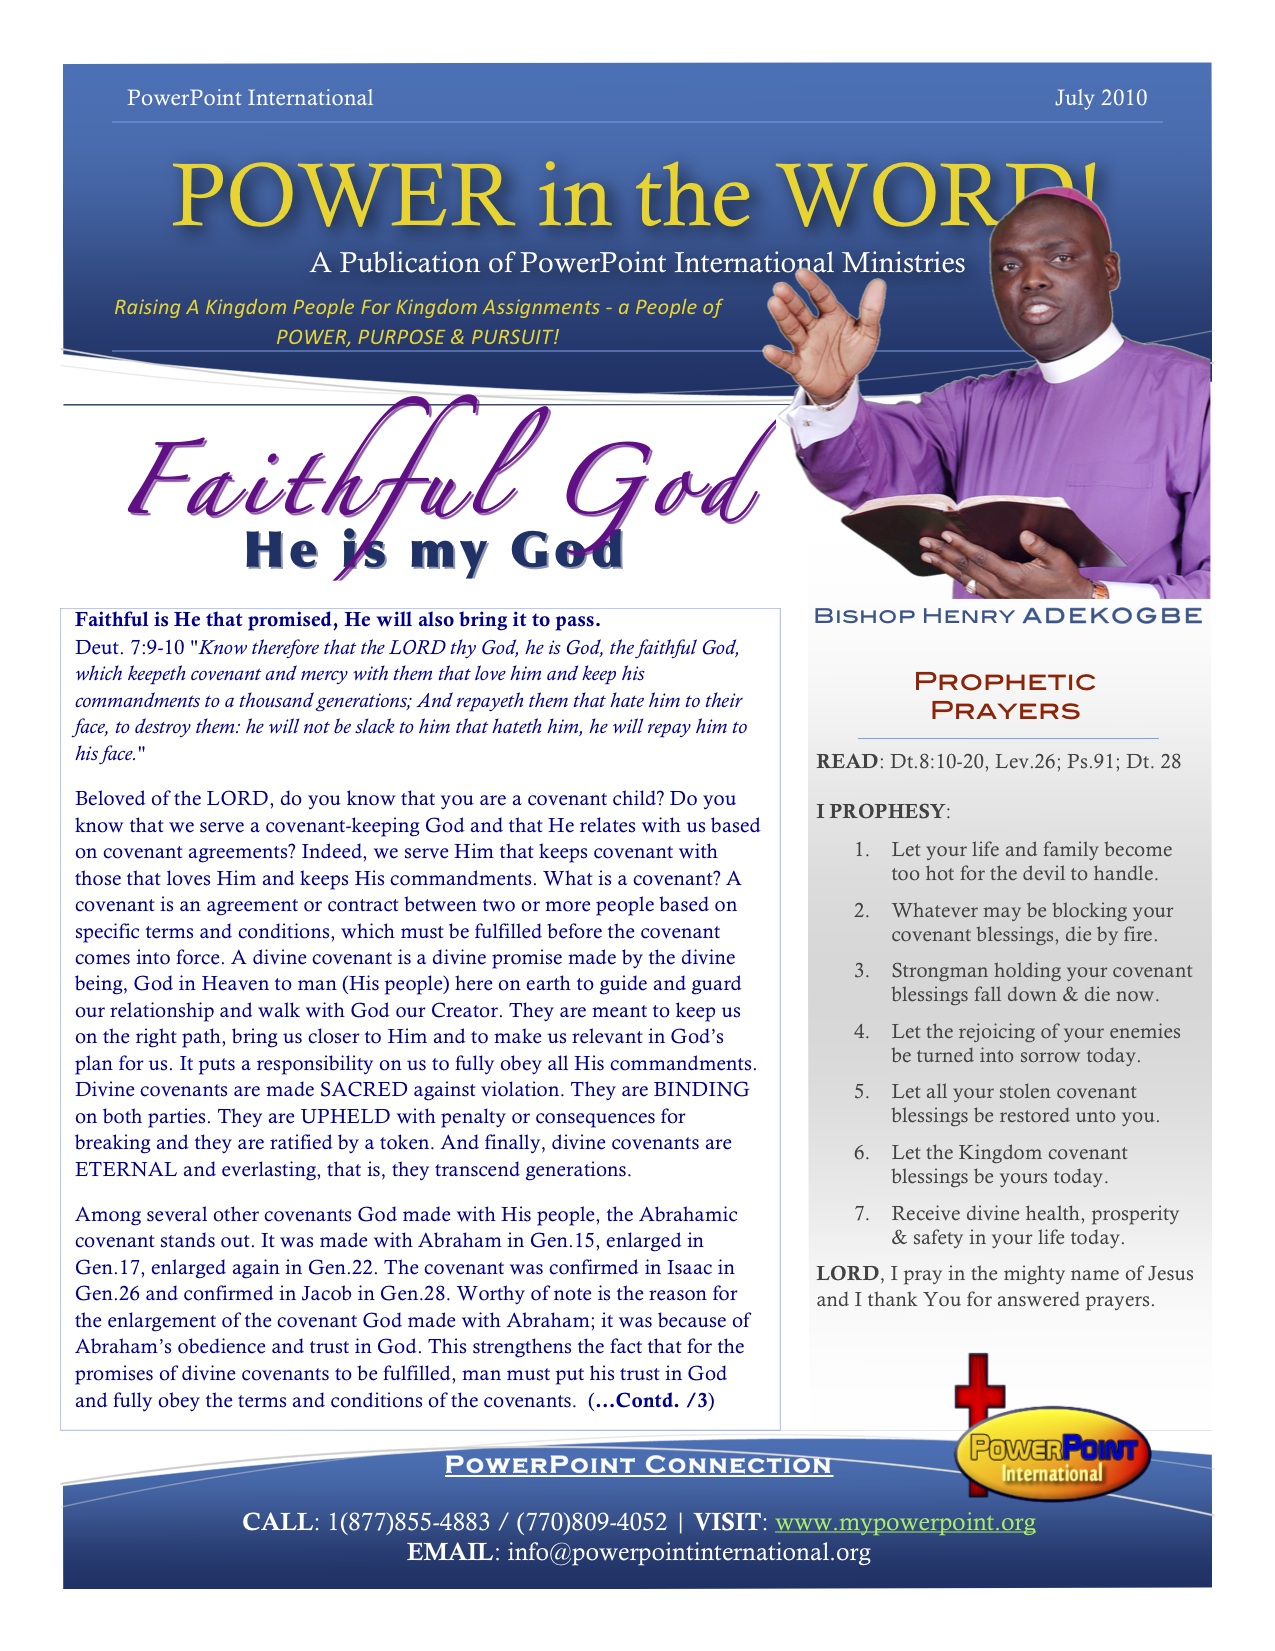 POWER IN THE WORD JULY 2010 NEWSLETTER